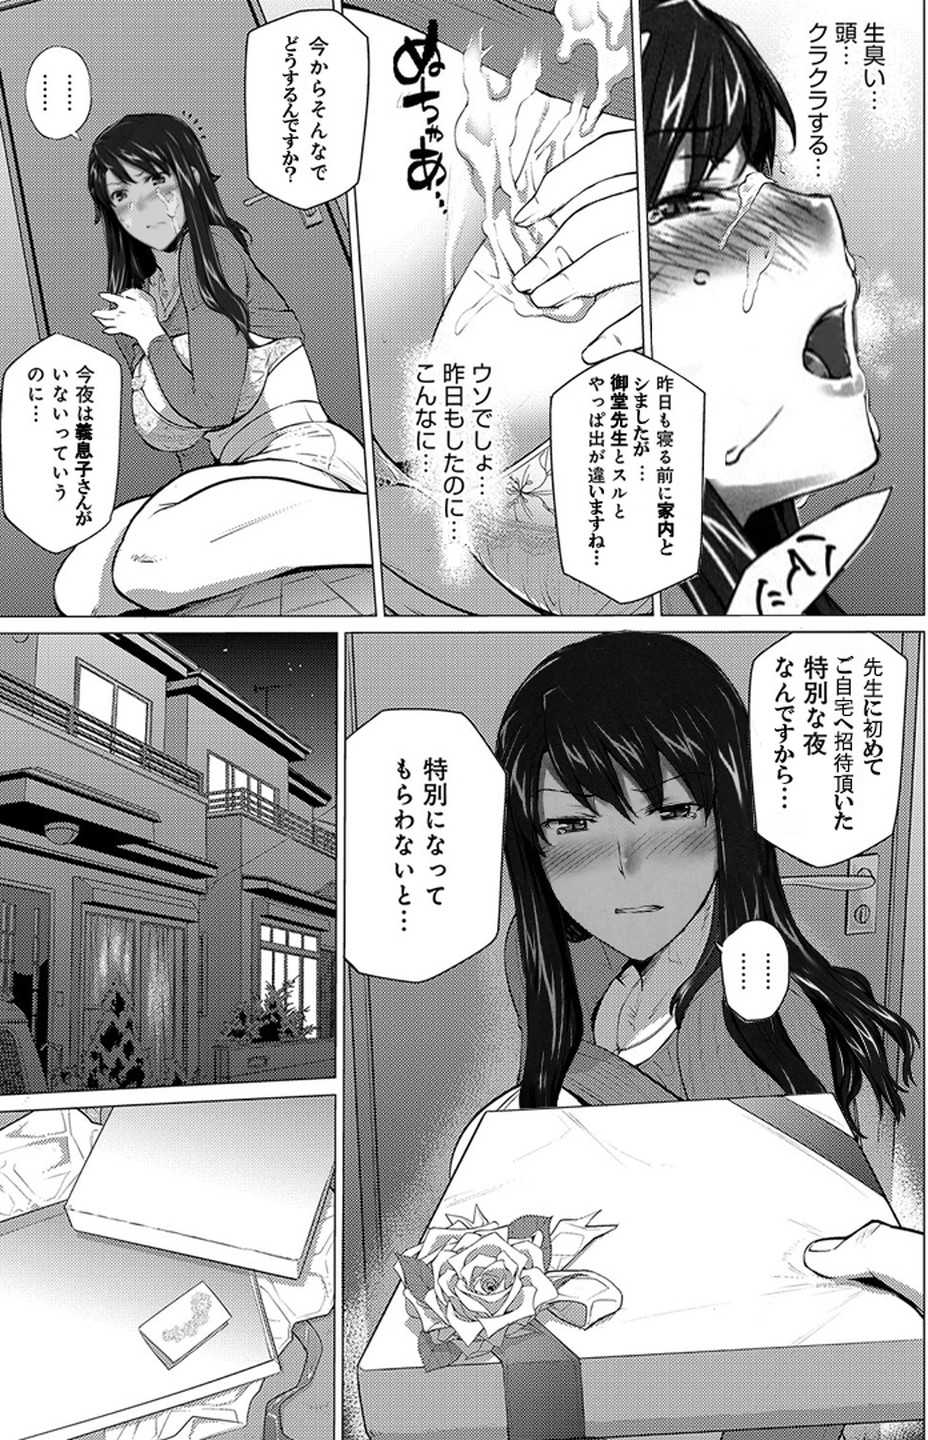 Sakiko-san in delusion Vol.4 ~Sakiko-san's circumstance while her son in law is away~ (collage) - Page 12